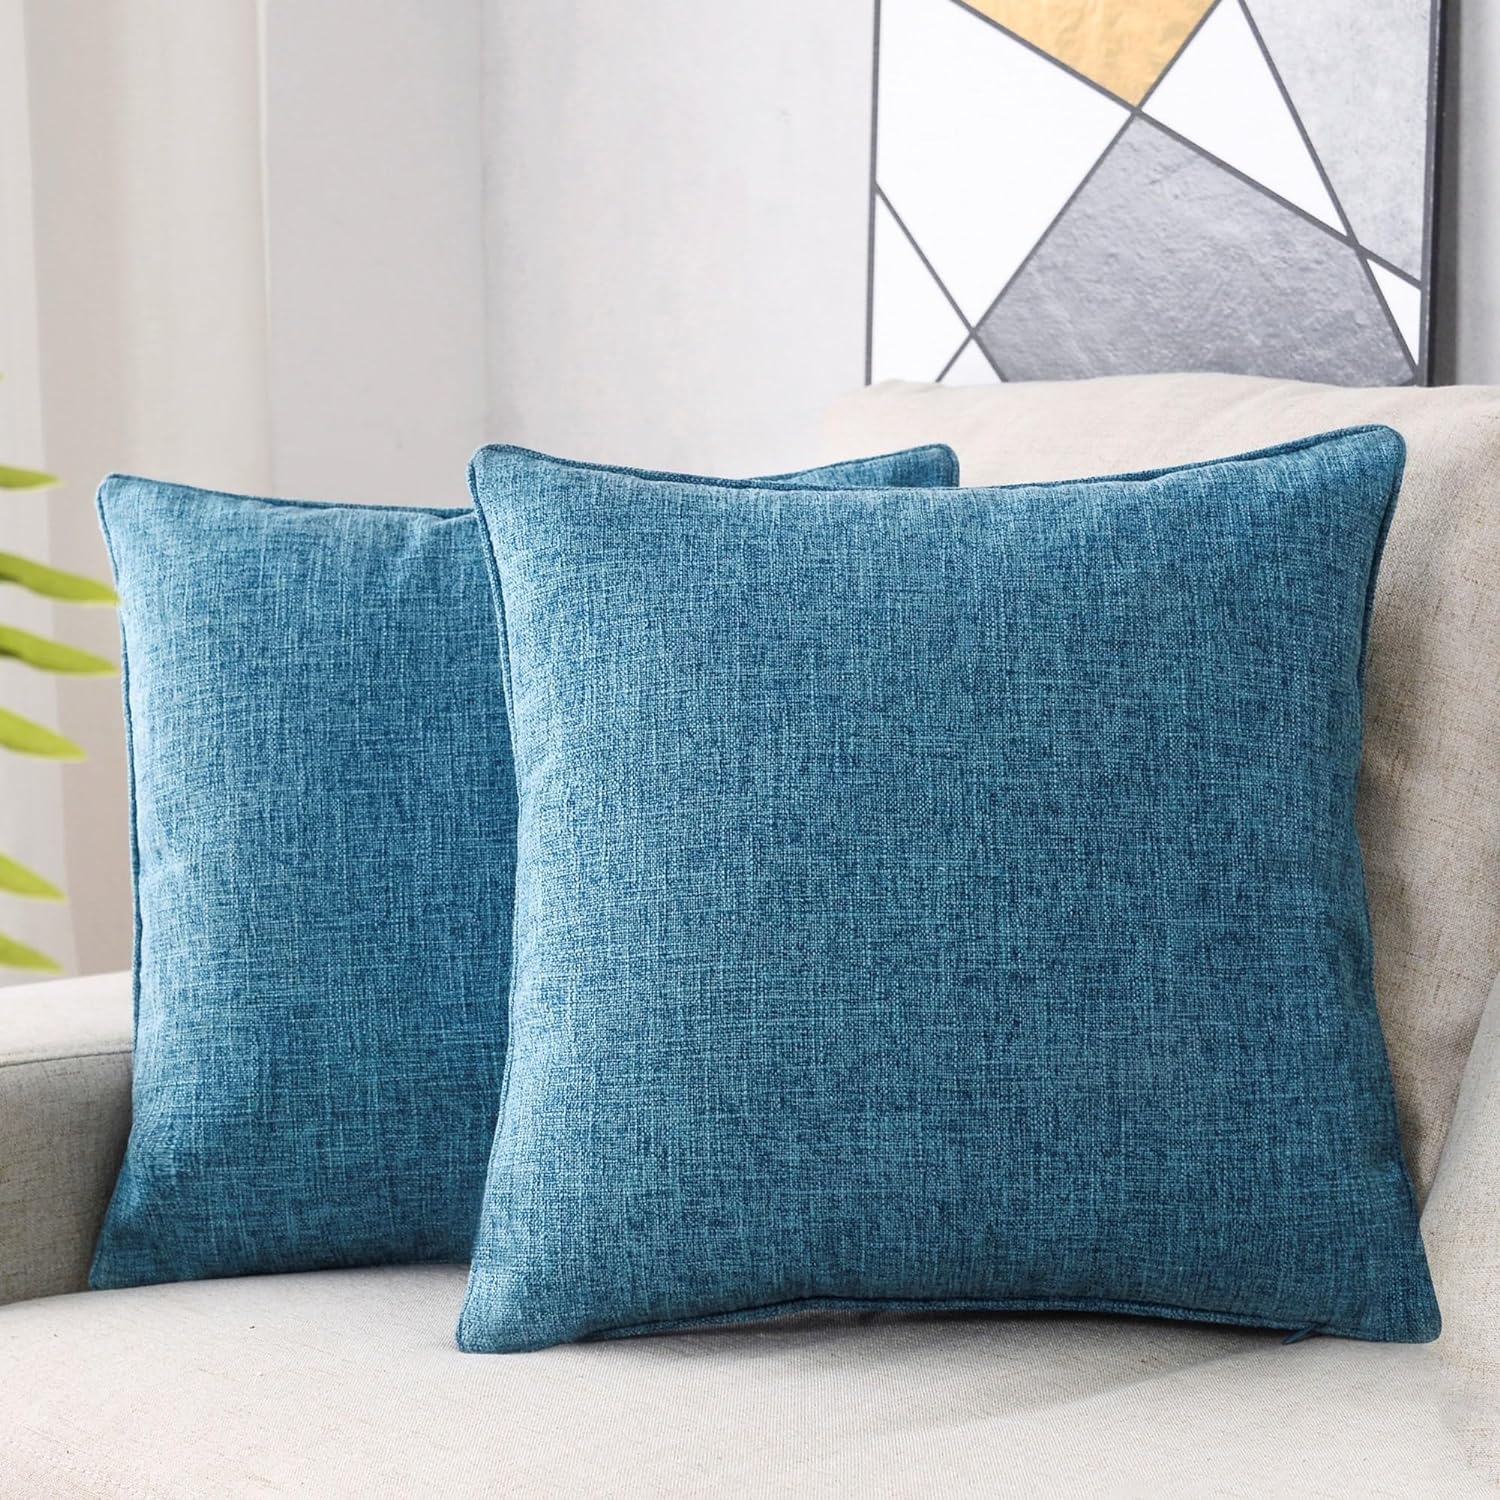 HPUK Aqua Blue Throw Pillow Covers Pack of 2, 18x18 Inch Accent Cushion Covers for Living Room, Bedroom, Decorative Solid Color Pillow Covers for Couch, Sofa, Chair, Aqua Blue